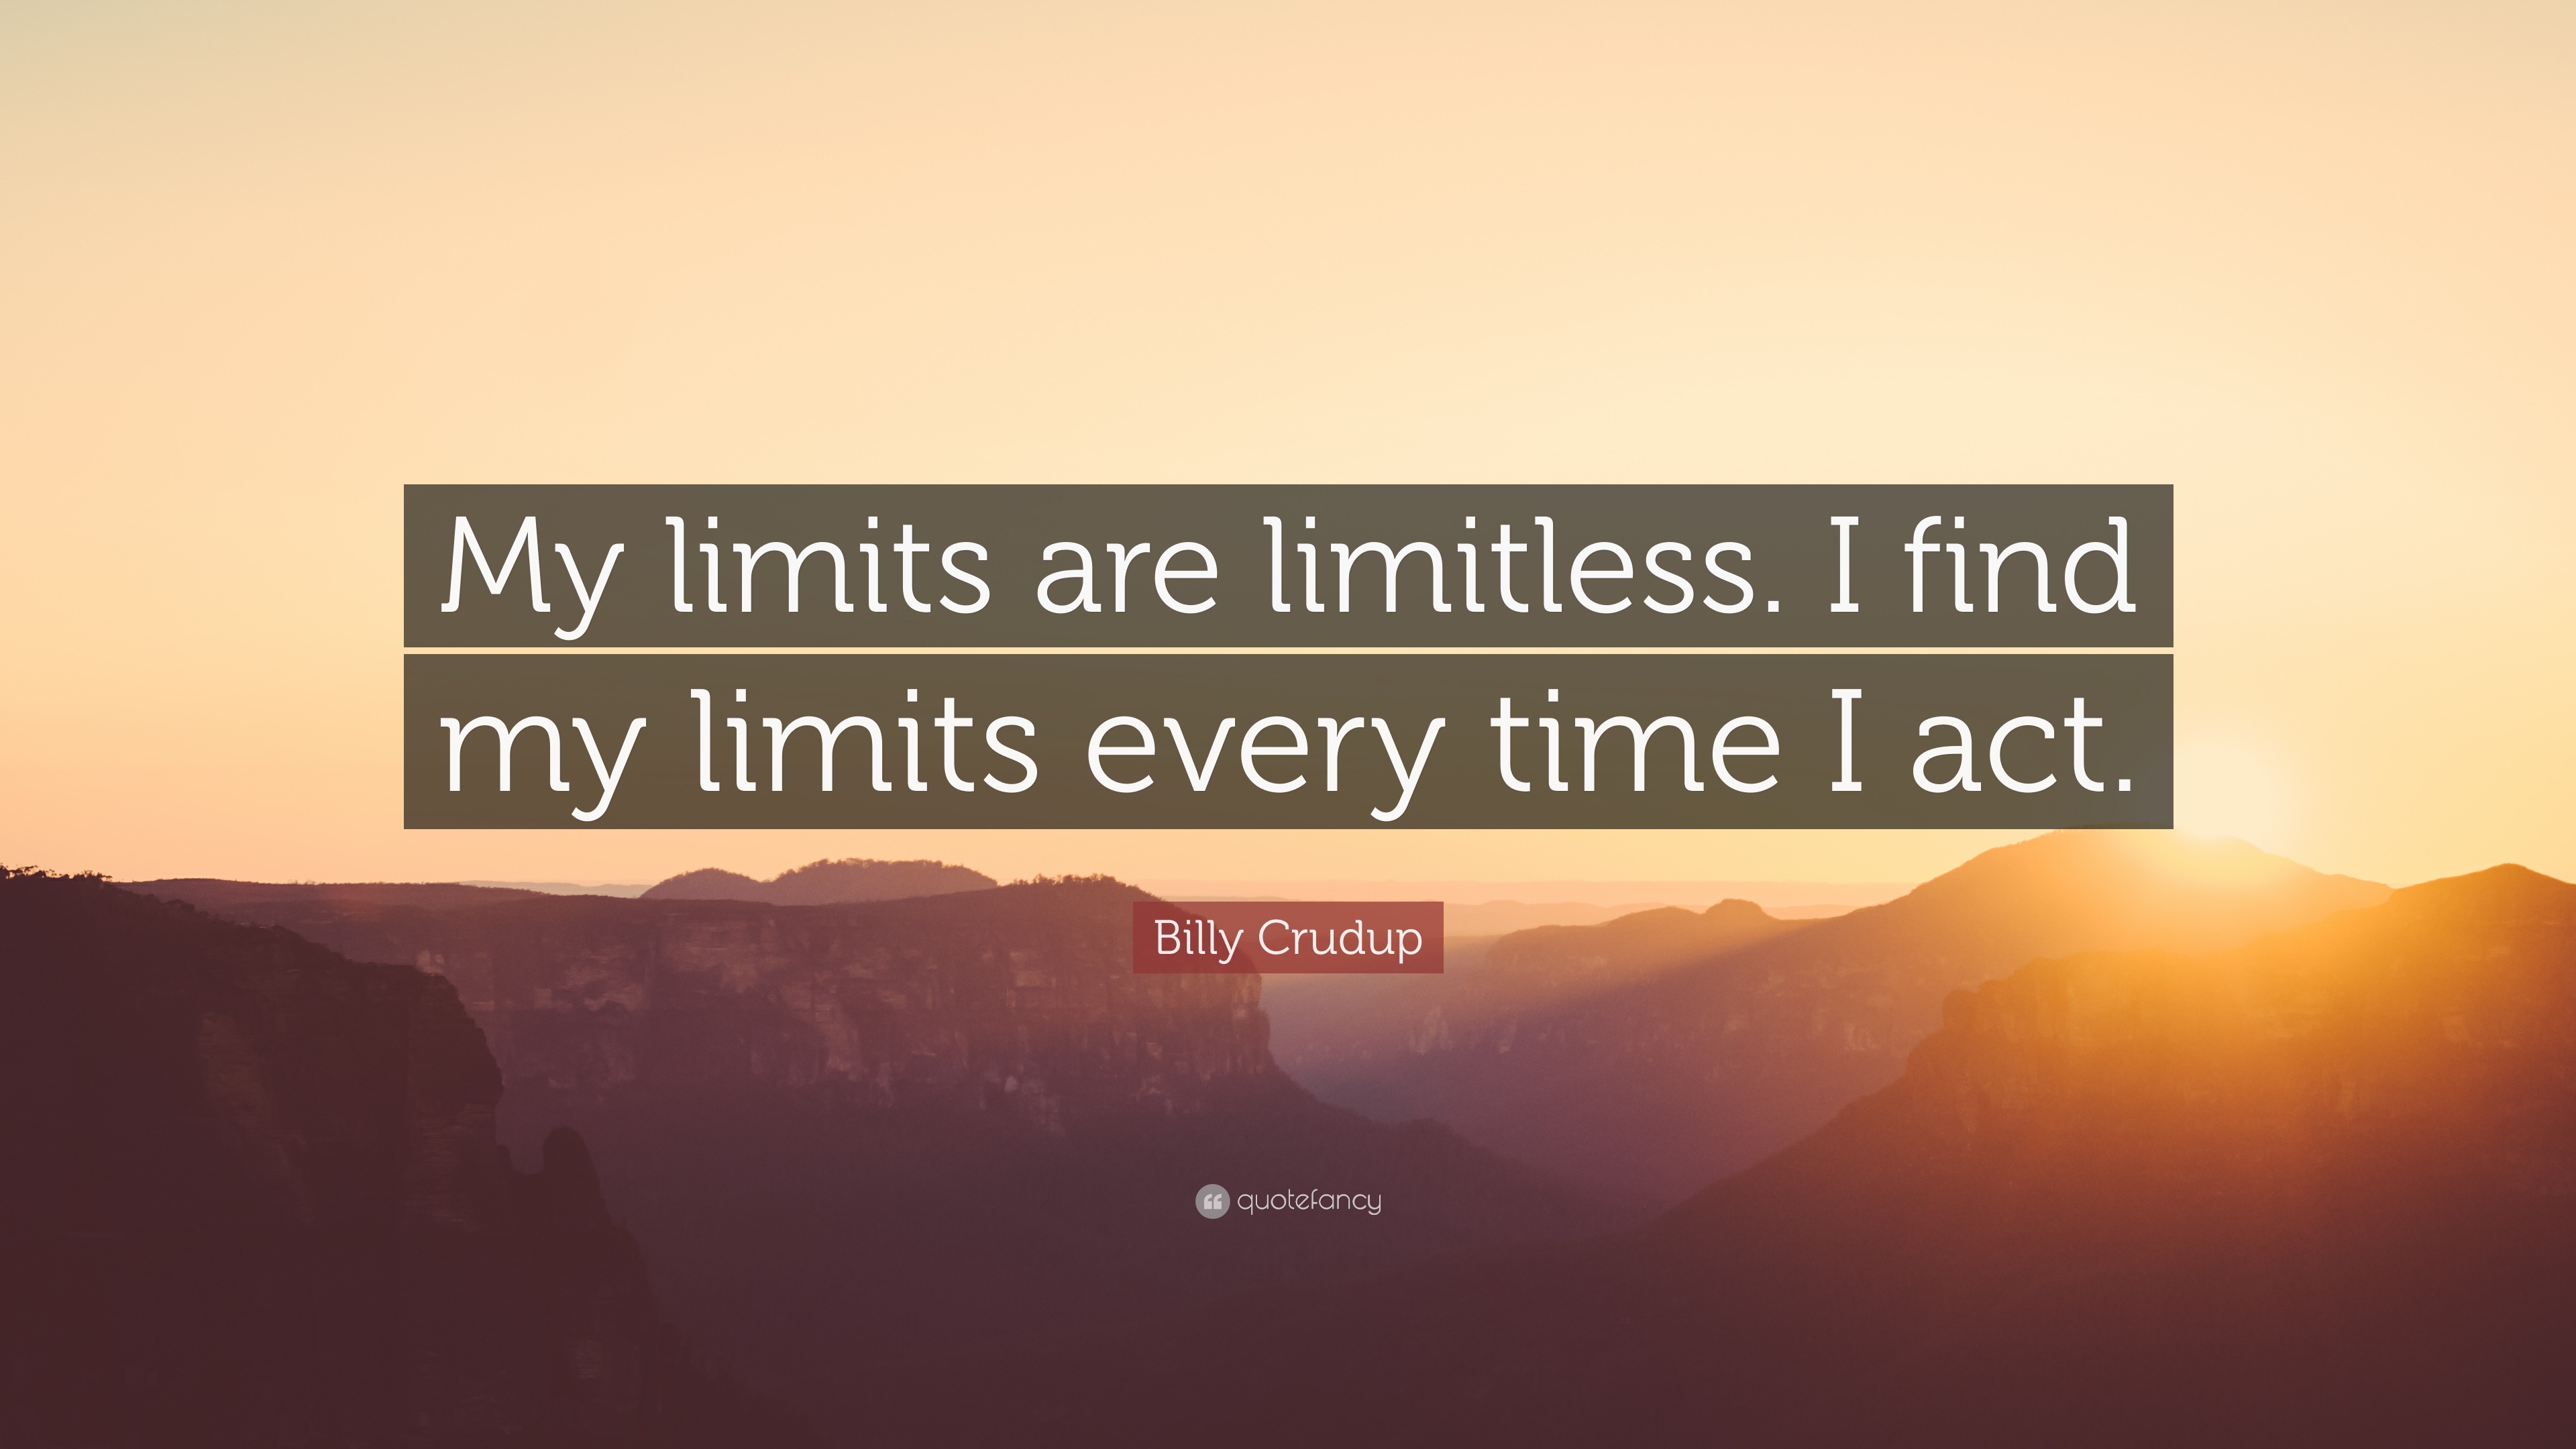 Billy Crudup Quote: “My limits are find my every time act.”